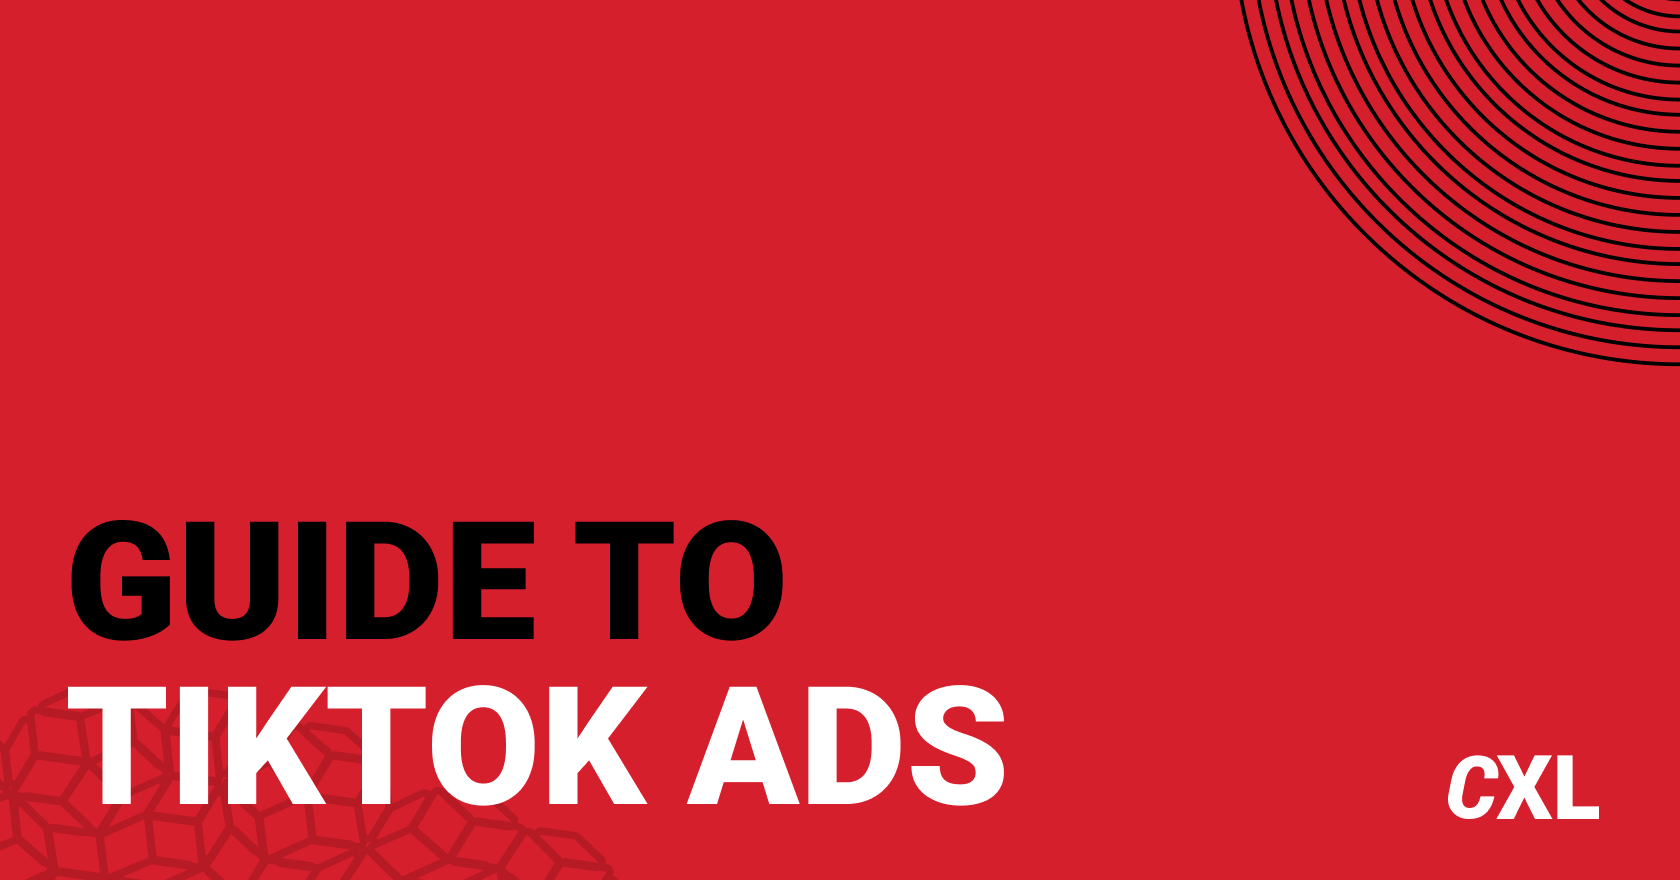 The CXL Guide to TikTok Ads: How to Use Them to Acquire New Customers